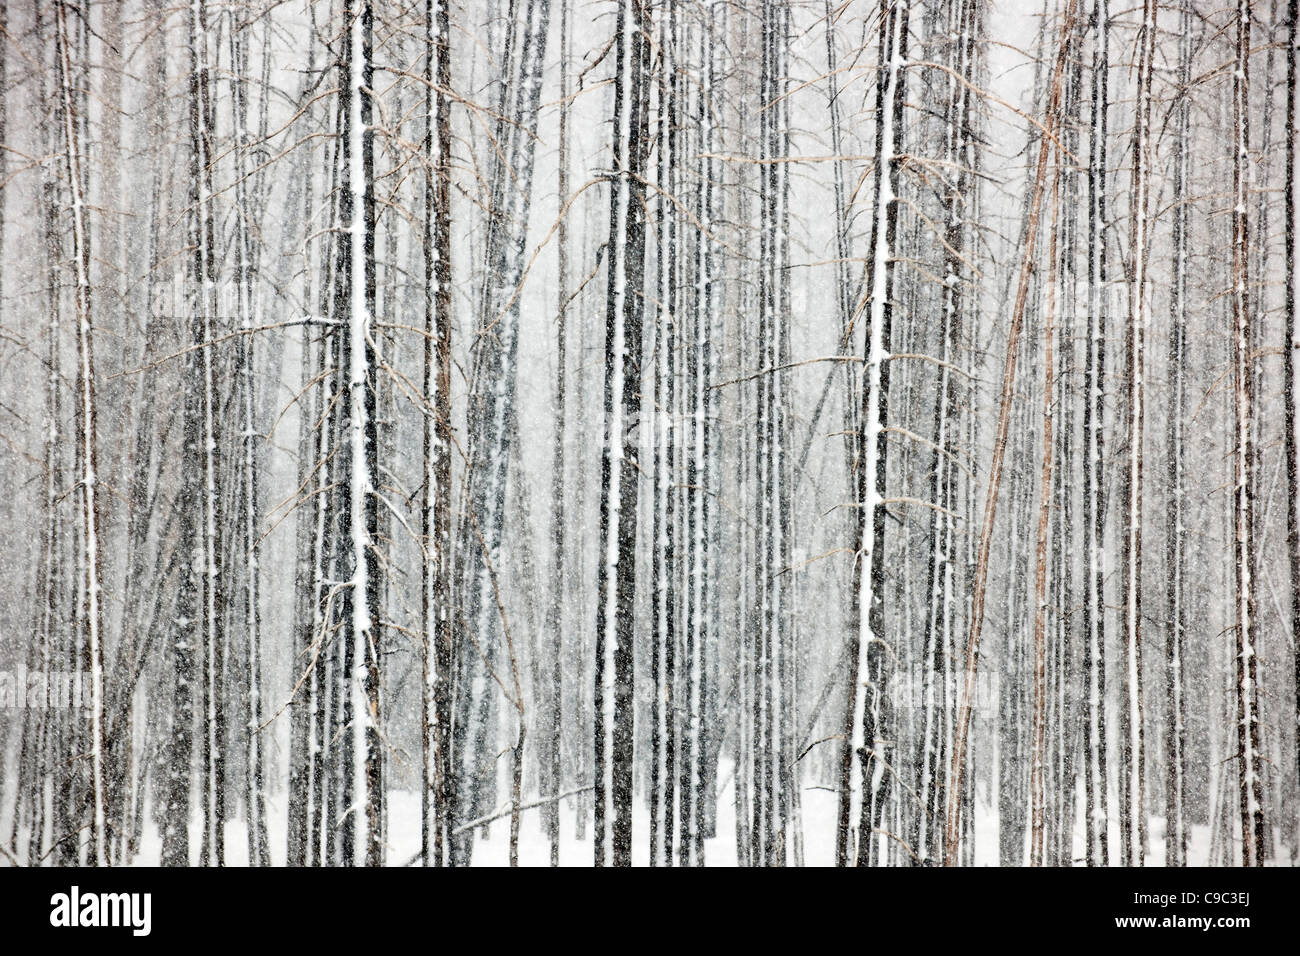 Winter Forest USA Banque D'Images